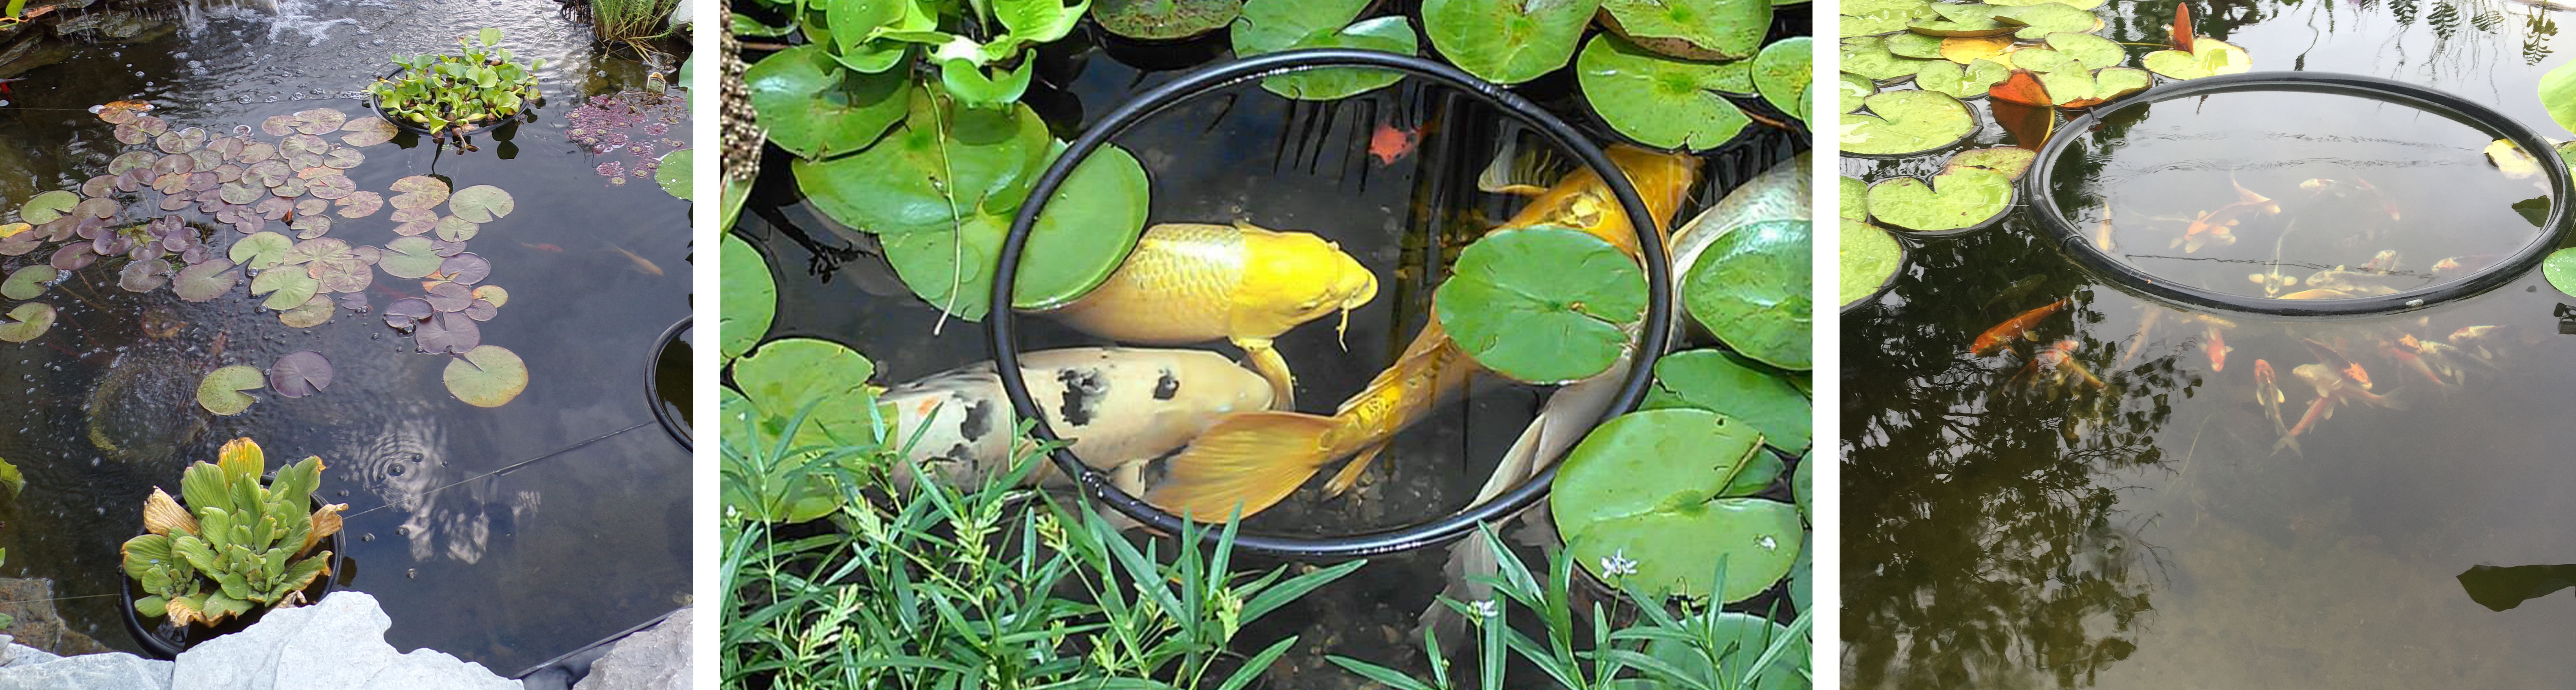 Use round floating feeder rings for feeding your pond fish or keeping your floating pond plants together and out of the skimmer box.